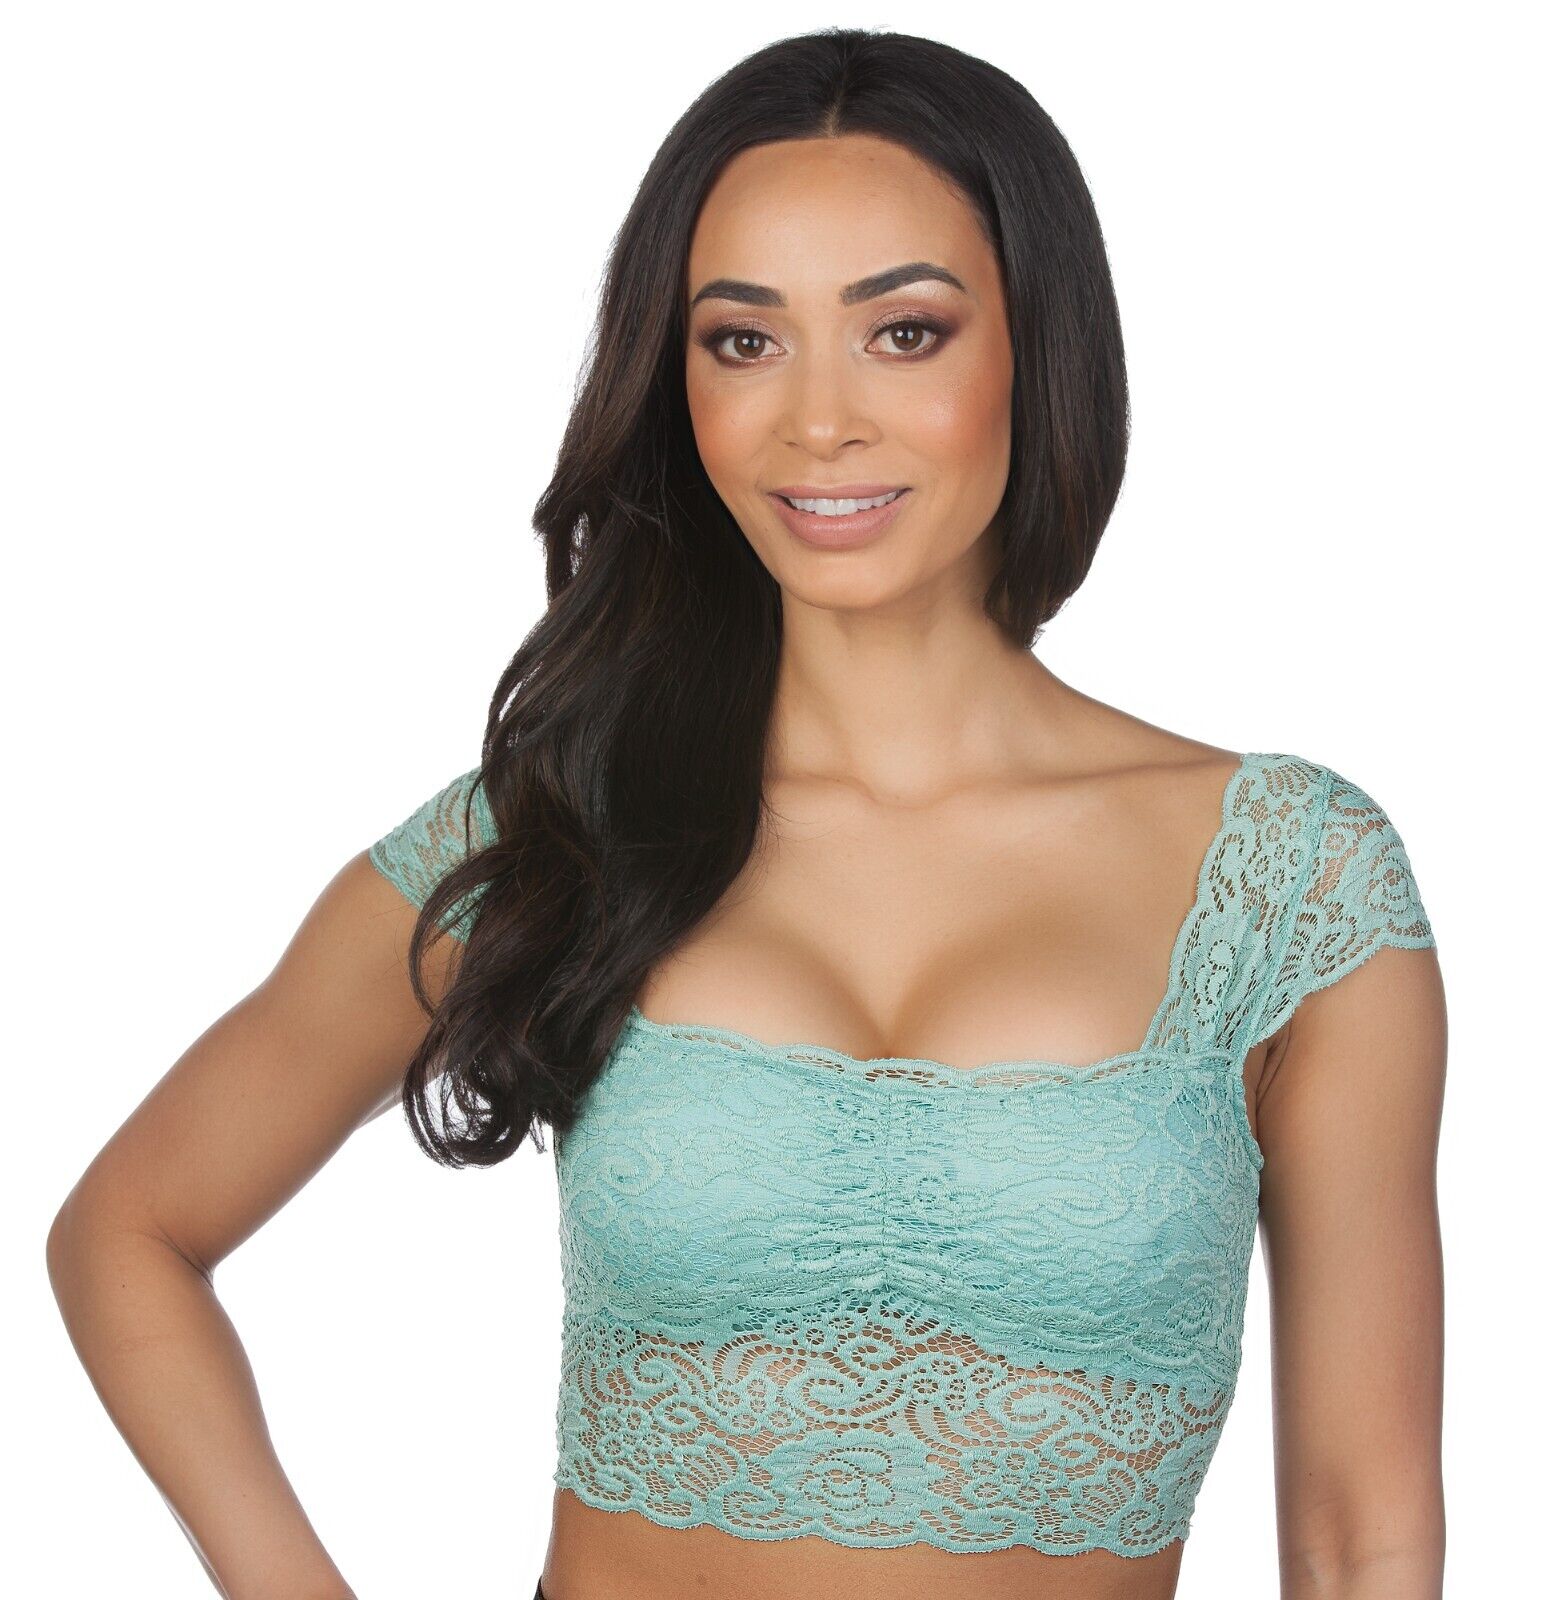 Women's Hot Night floral Lace with Shaped Cup Bralette Crop Top